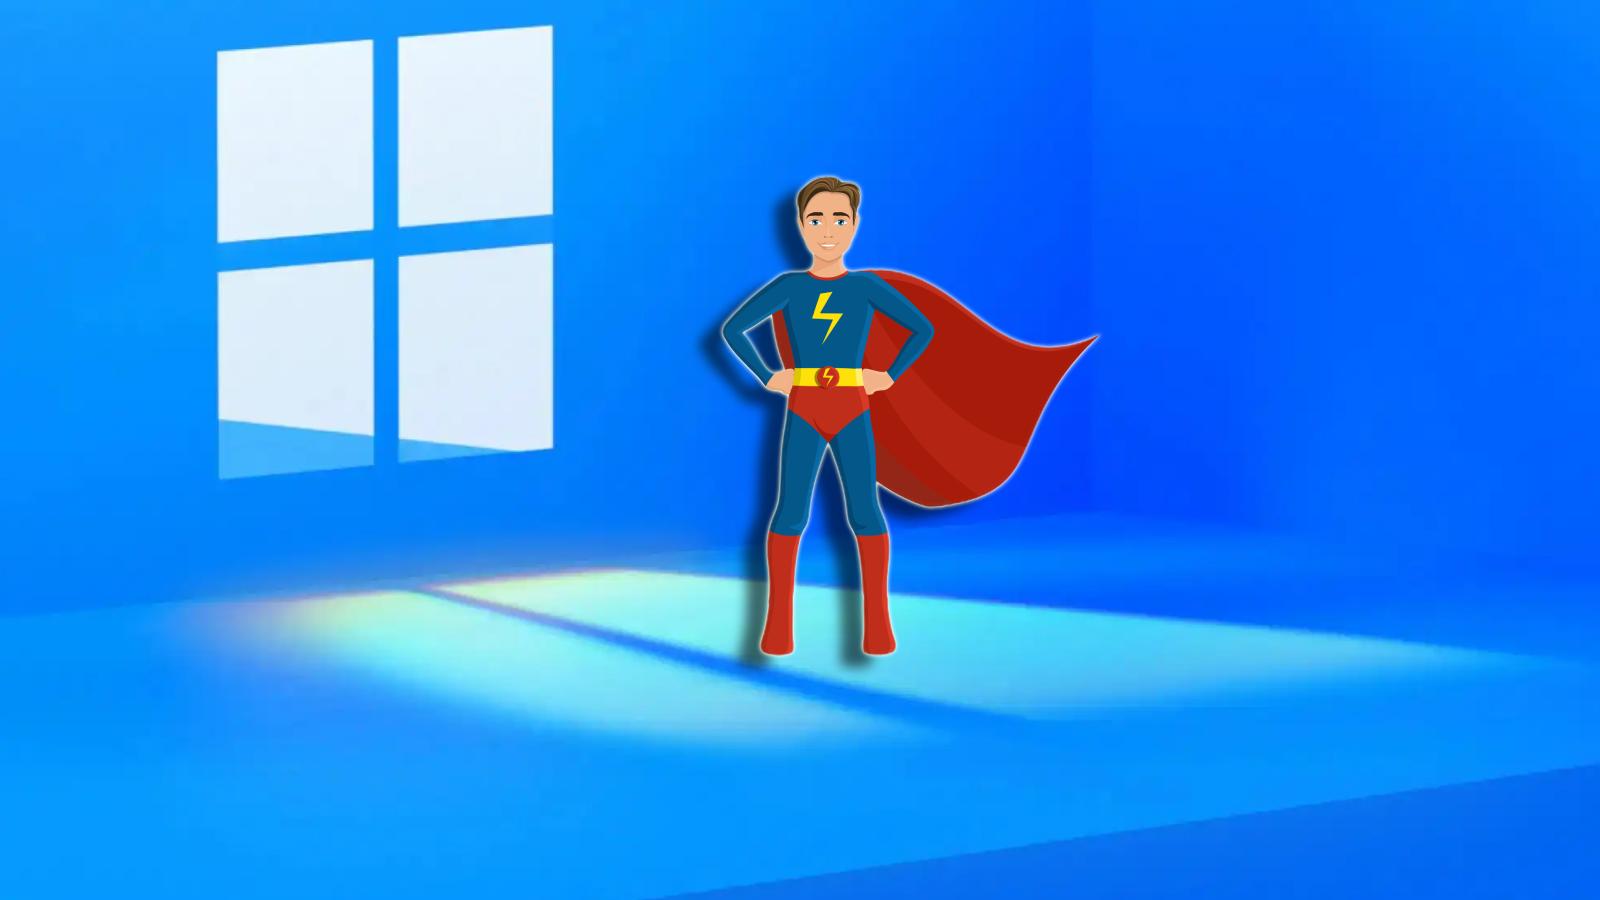 Windows wallpaper with a super hero character